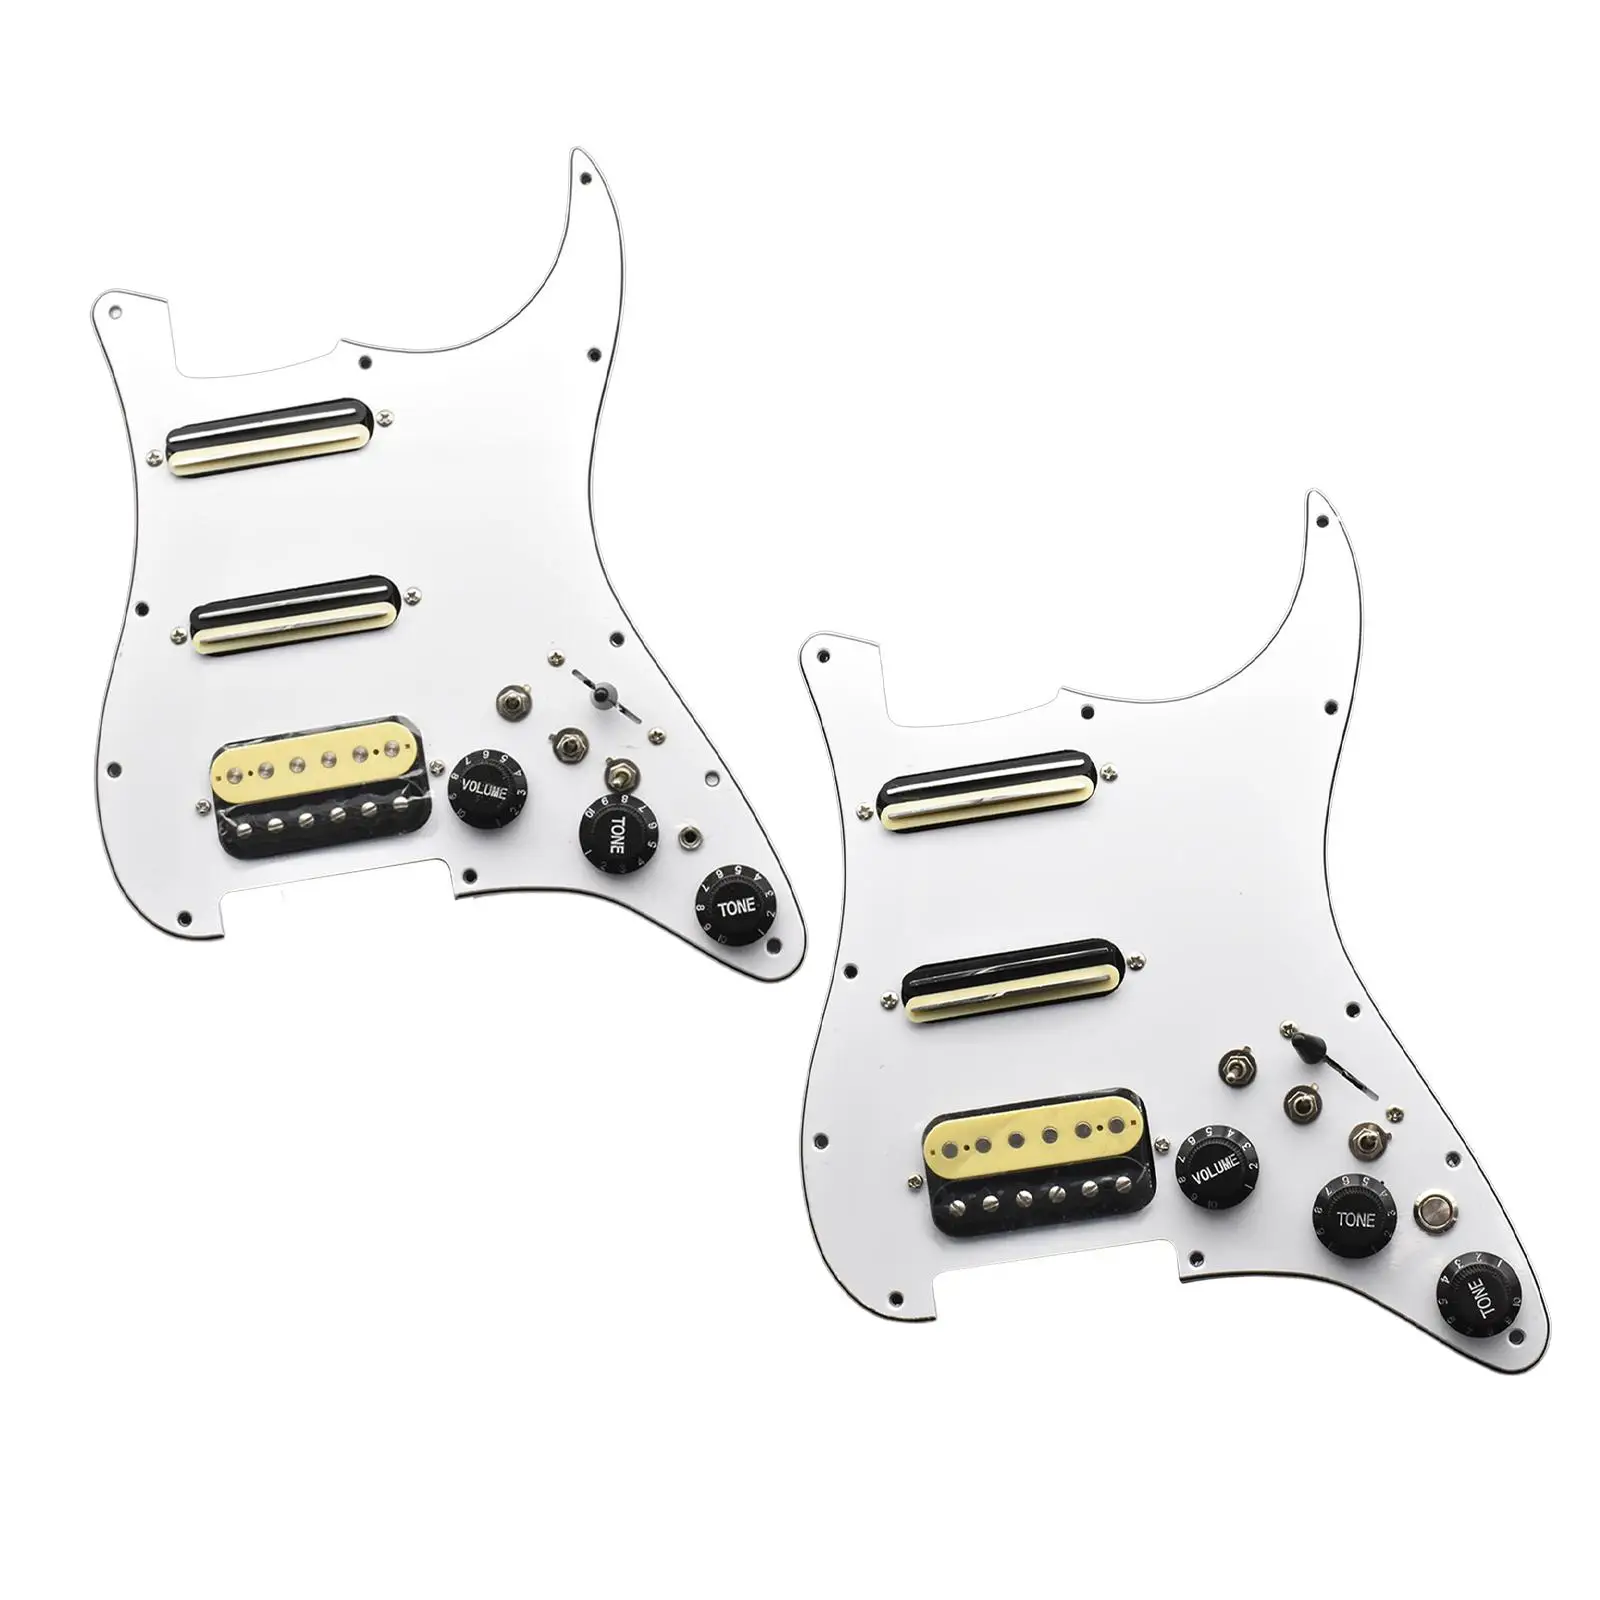 Loaded Pickguard for Guitar, Replaces, Easy Installation Prewired Loaded